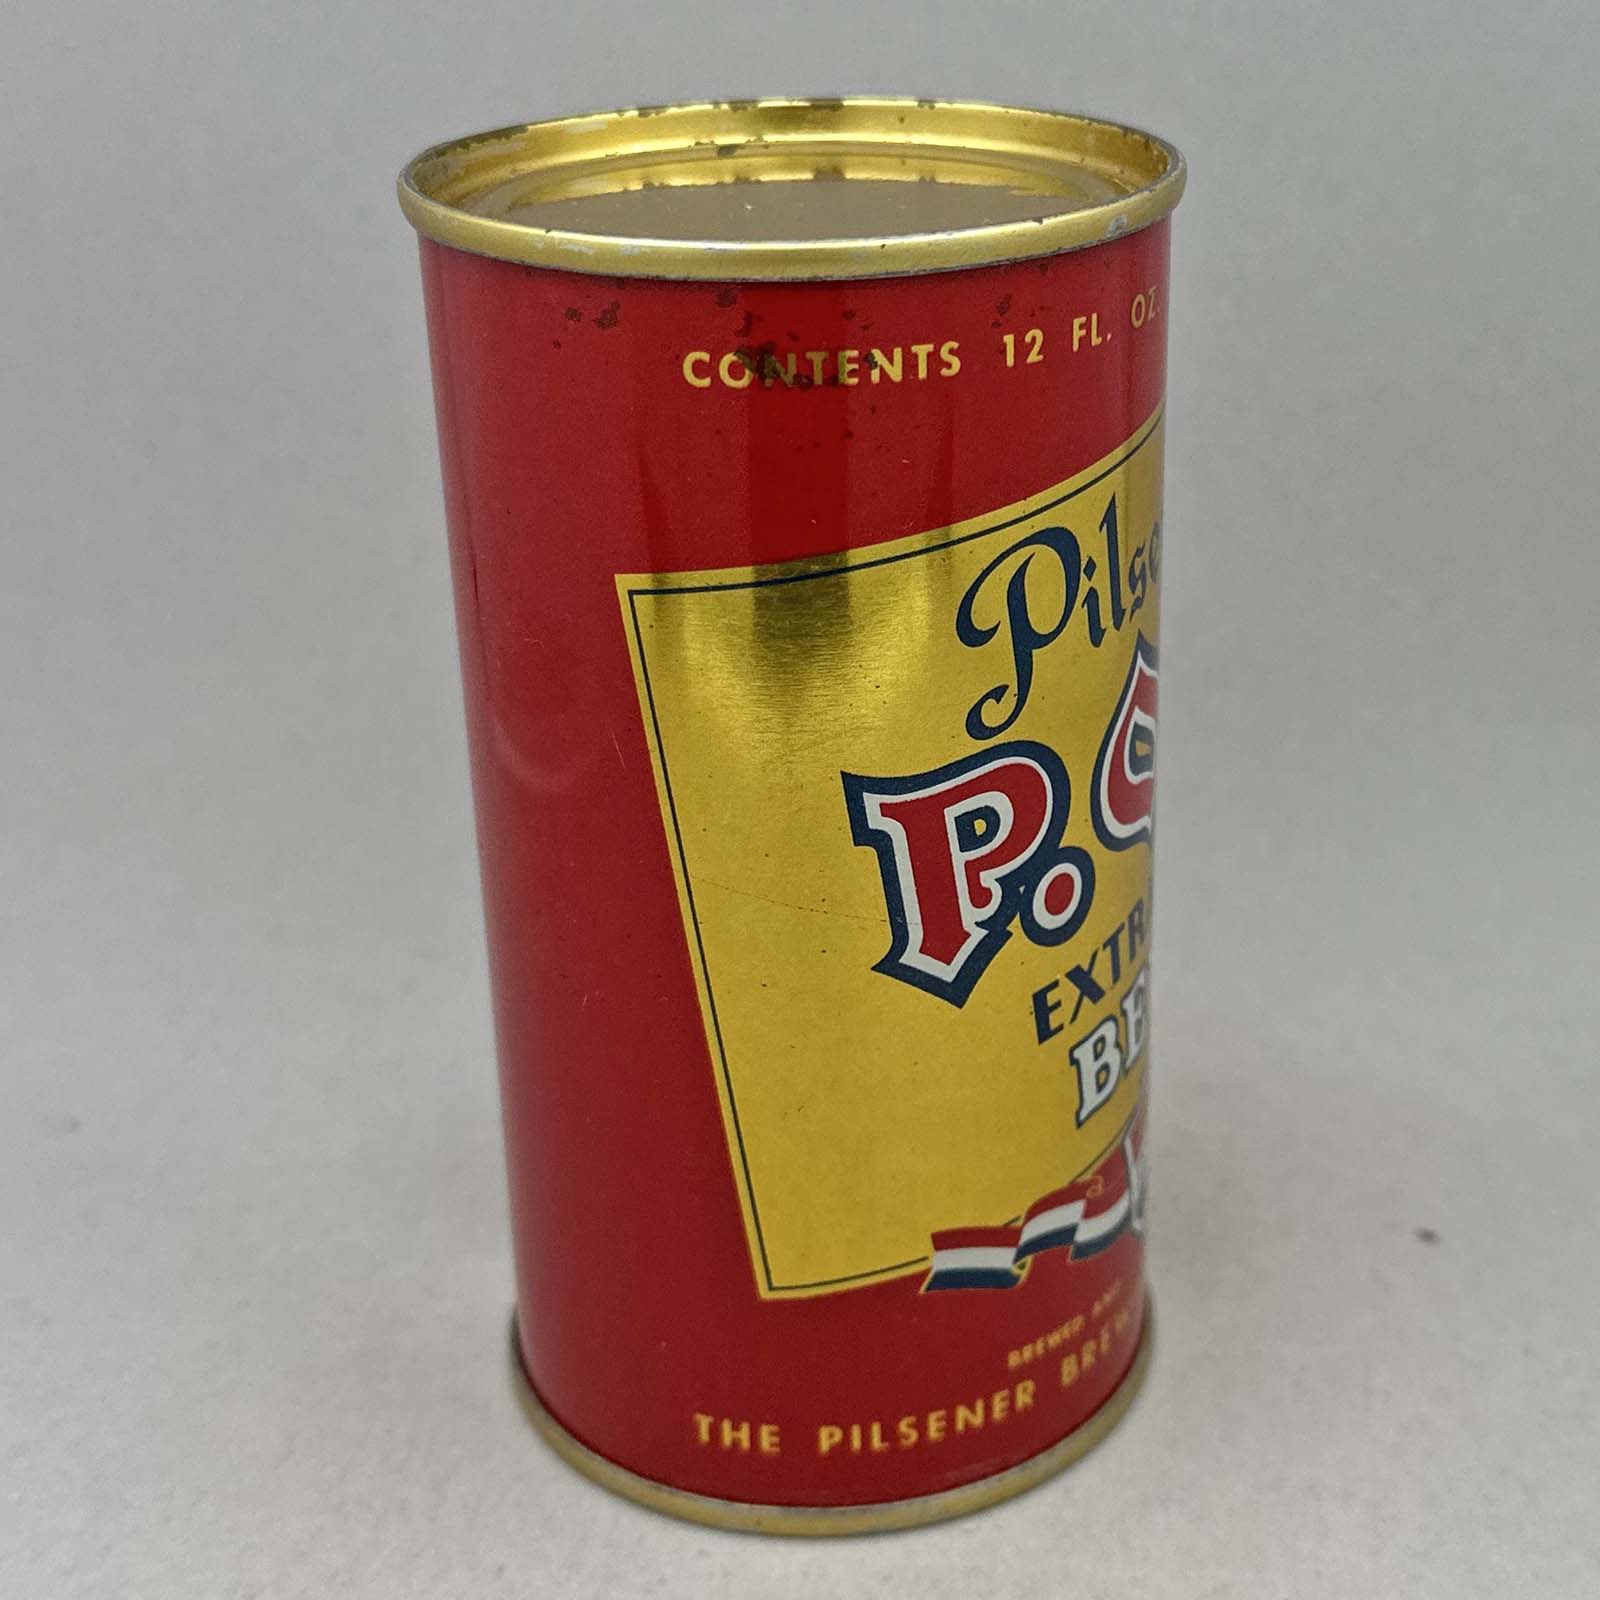 POC 116-10 flat top beer can 4